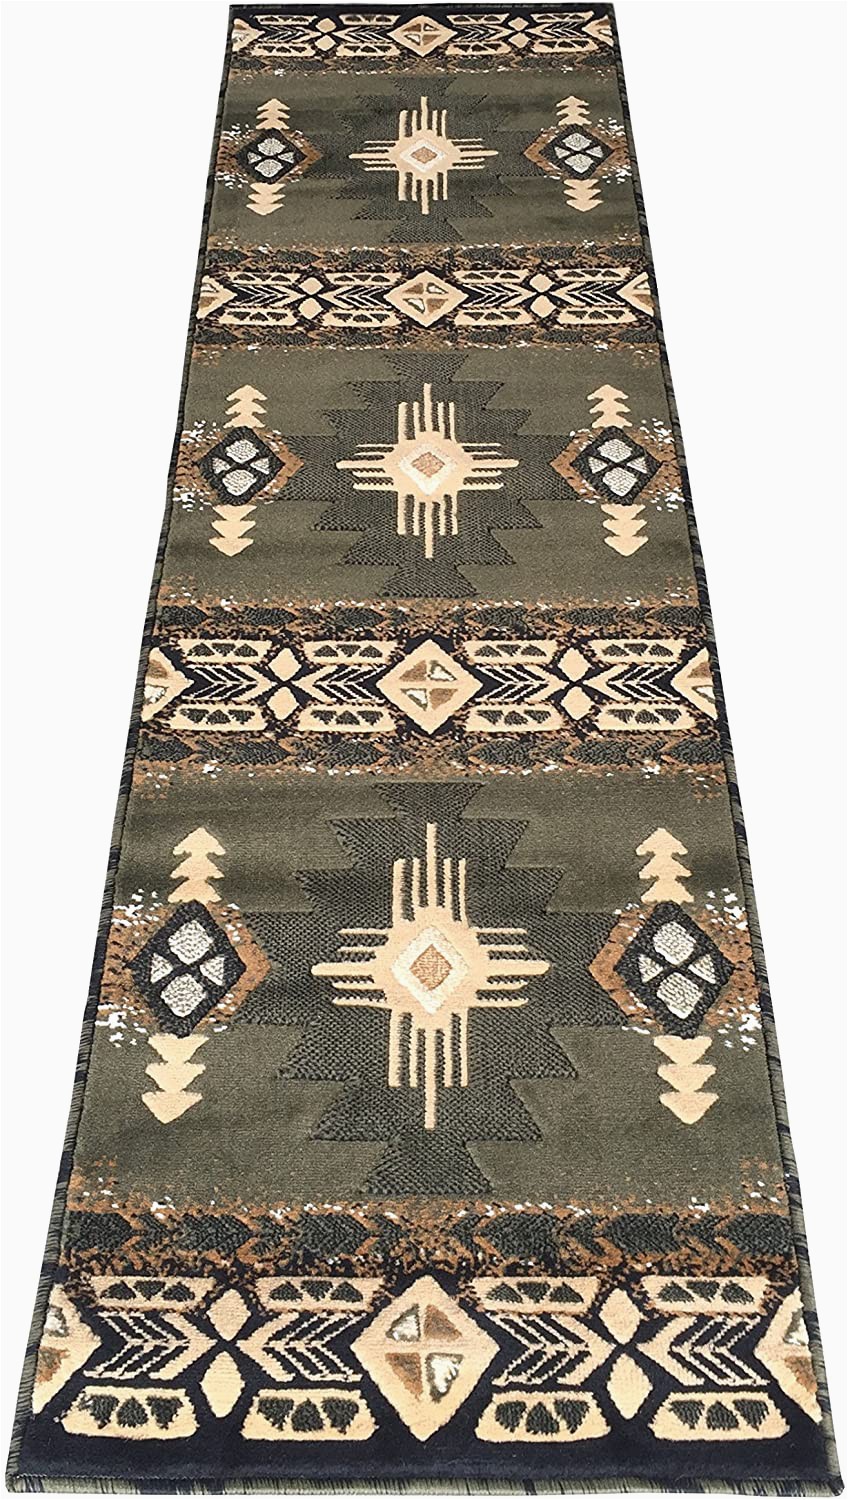 Native American Indian Design area Rugs Rugs 4 Less Collection southwest Native American Indian Runner area Rug Design R4l 318 Olive Green Sage Green 2 X7